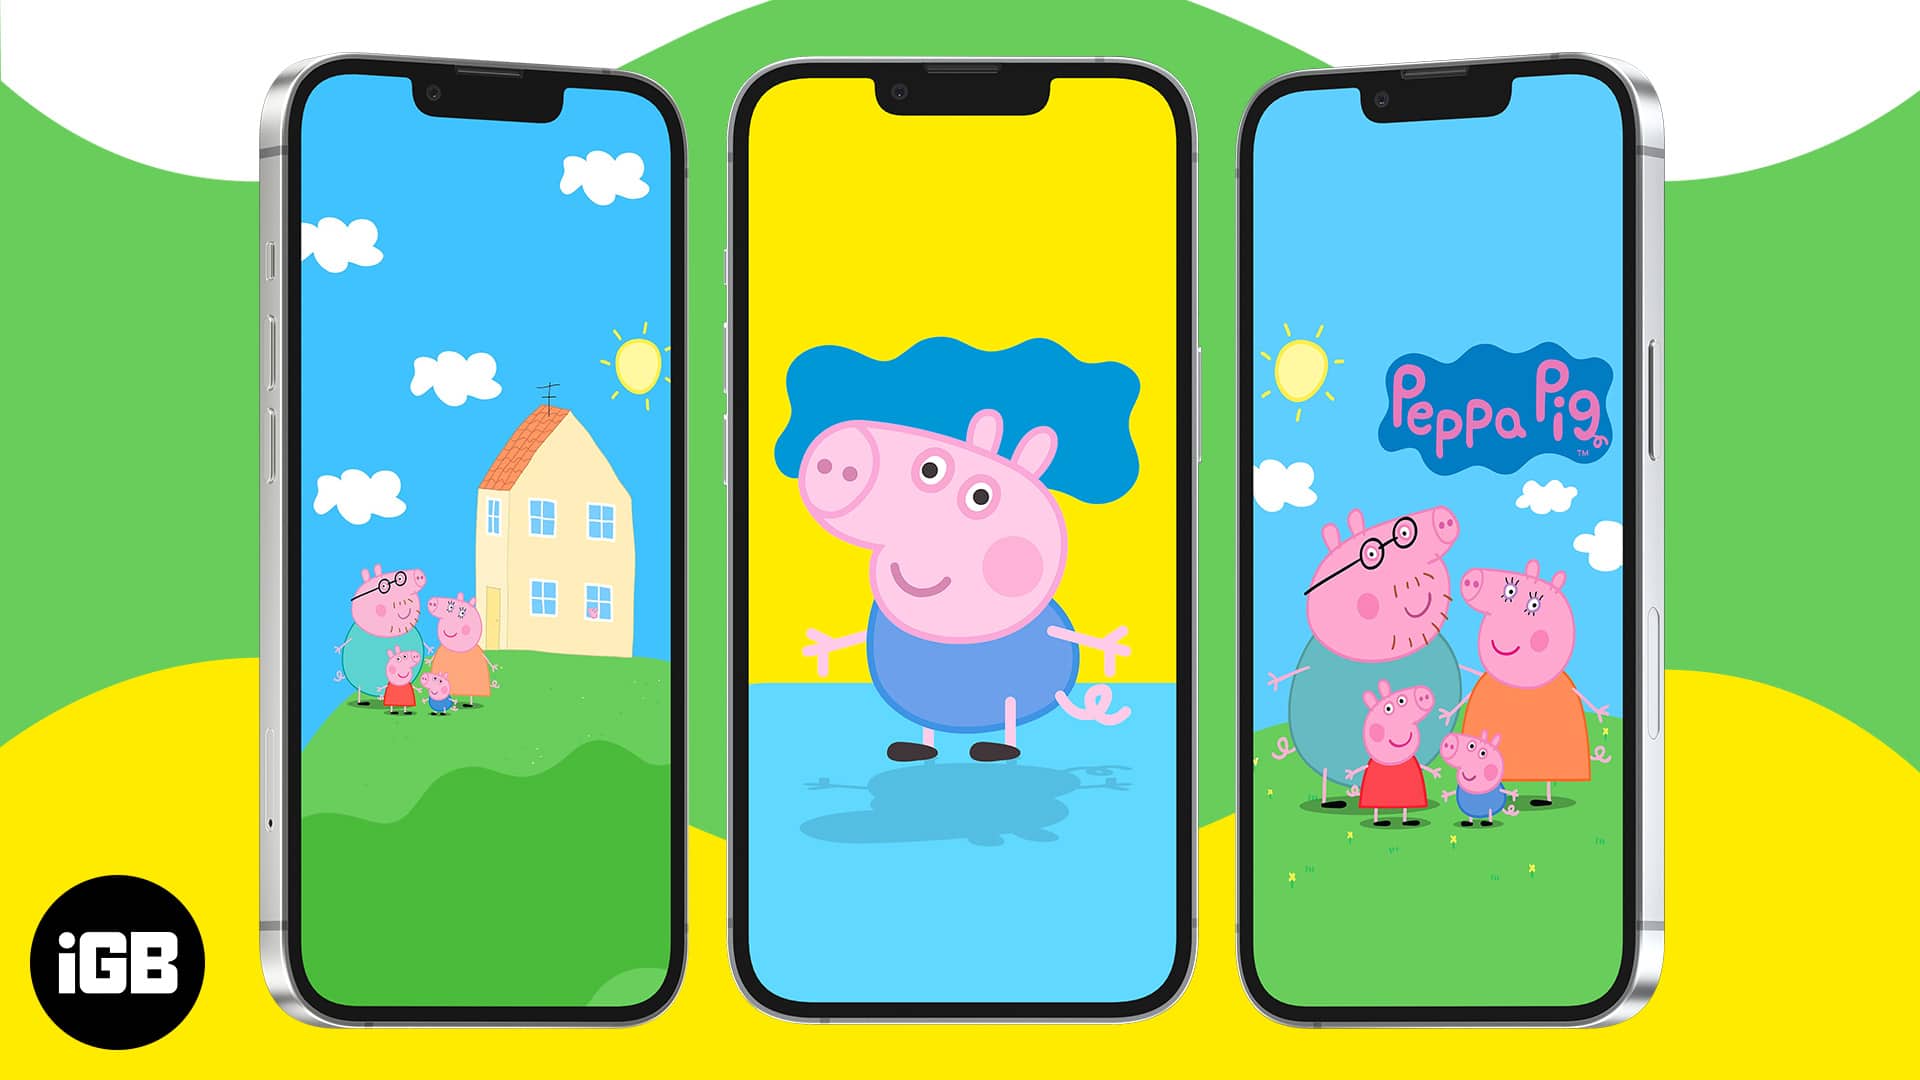 Peppa Pig iPhone wallpapers for kids and adults in 2023 - iGeeksBlog